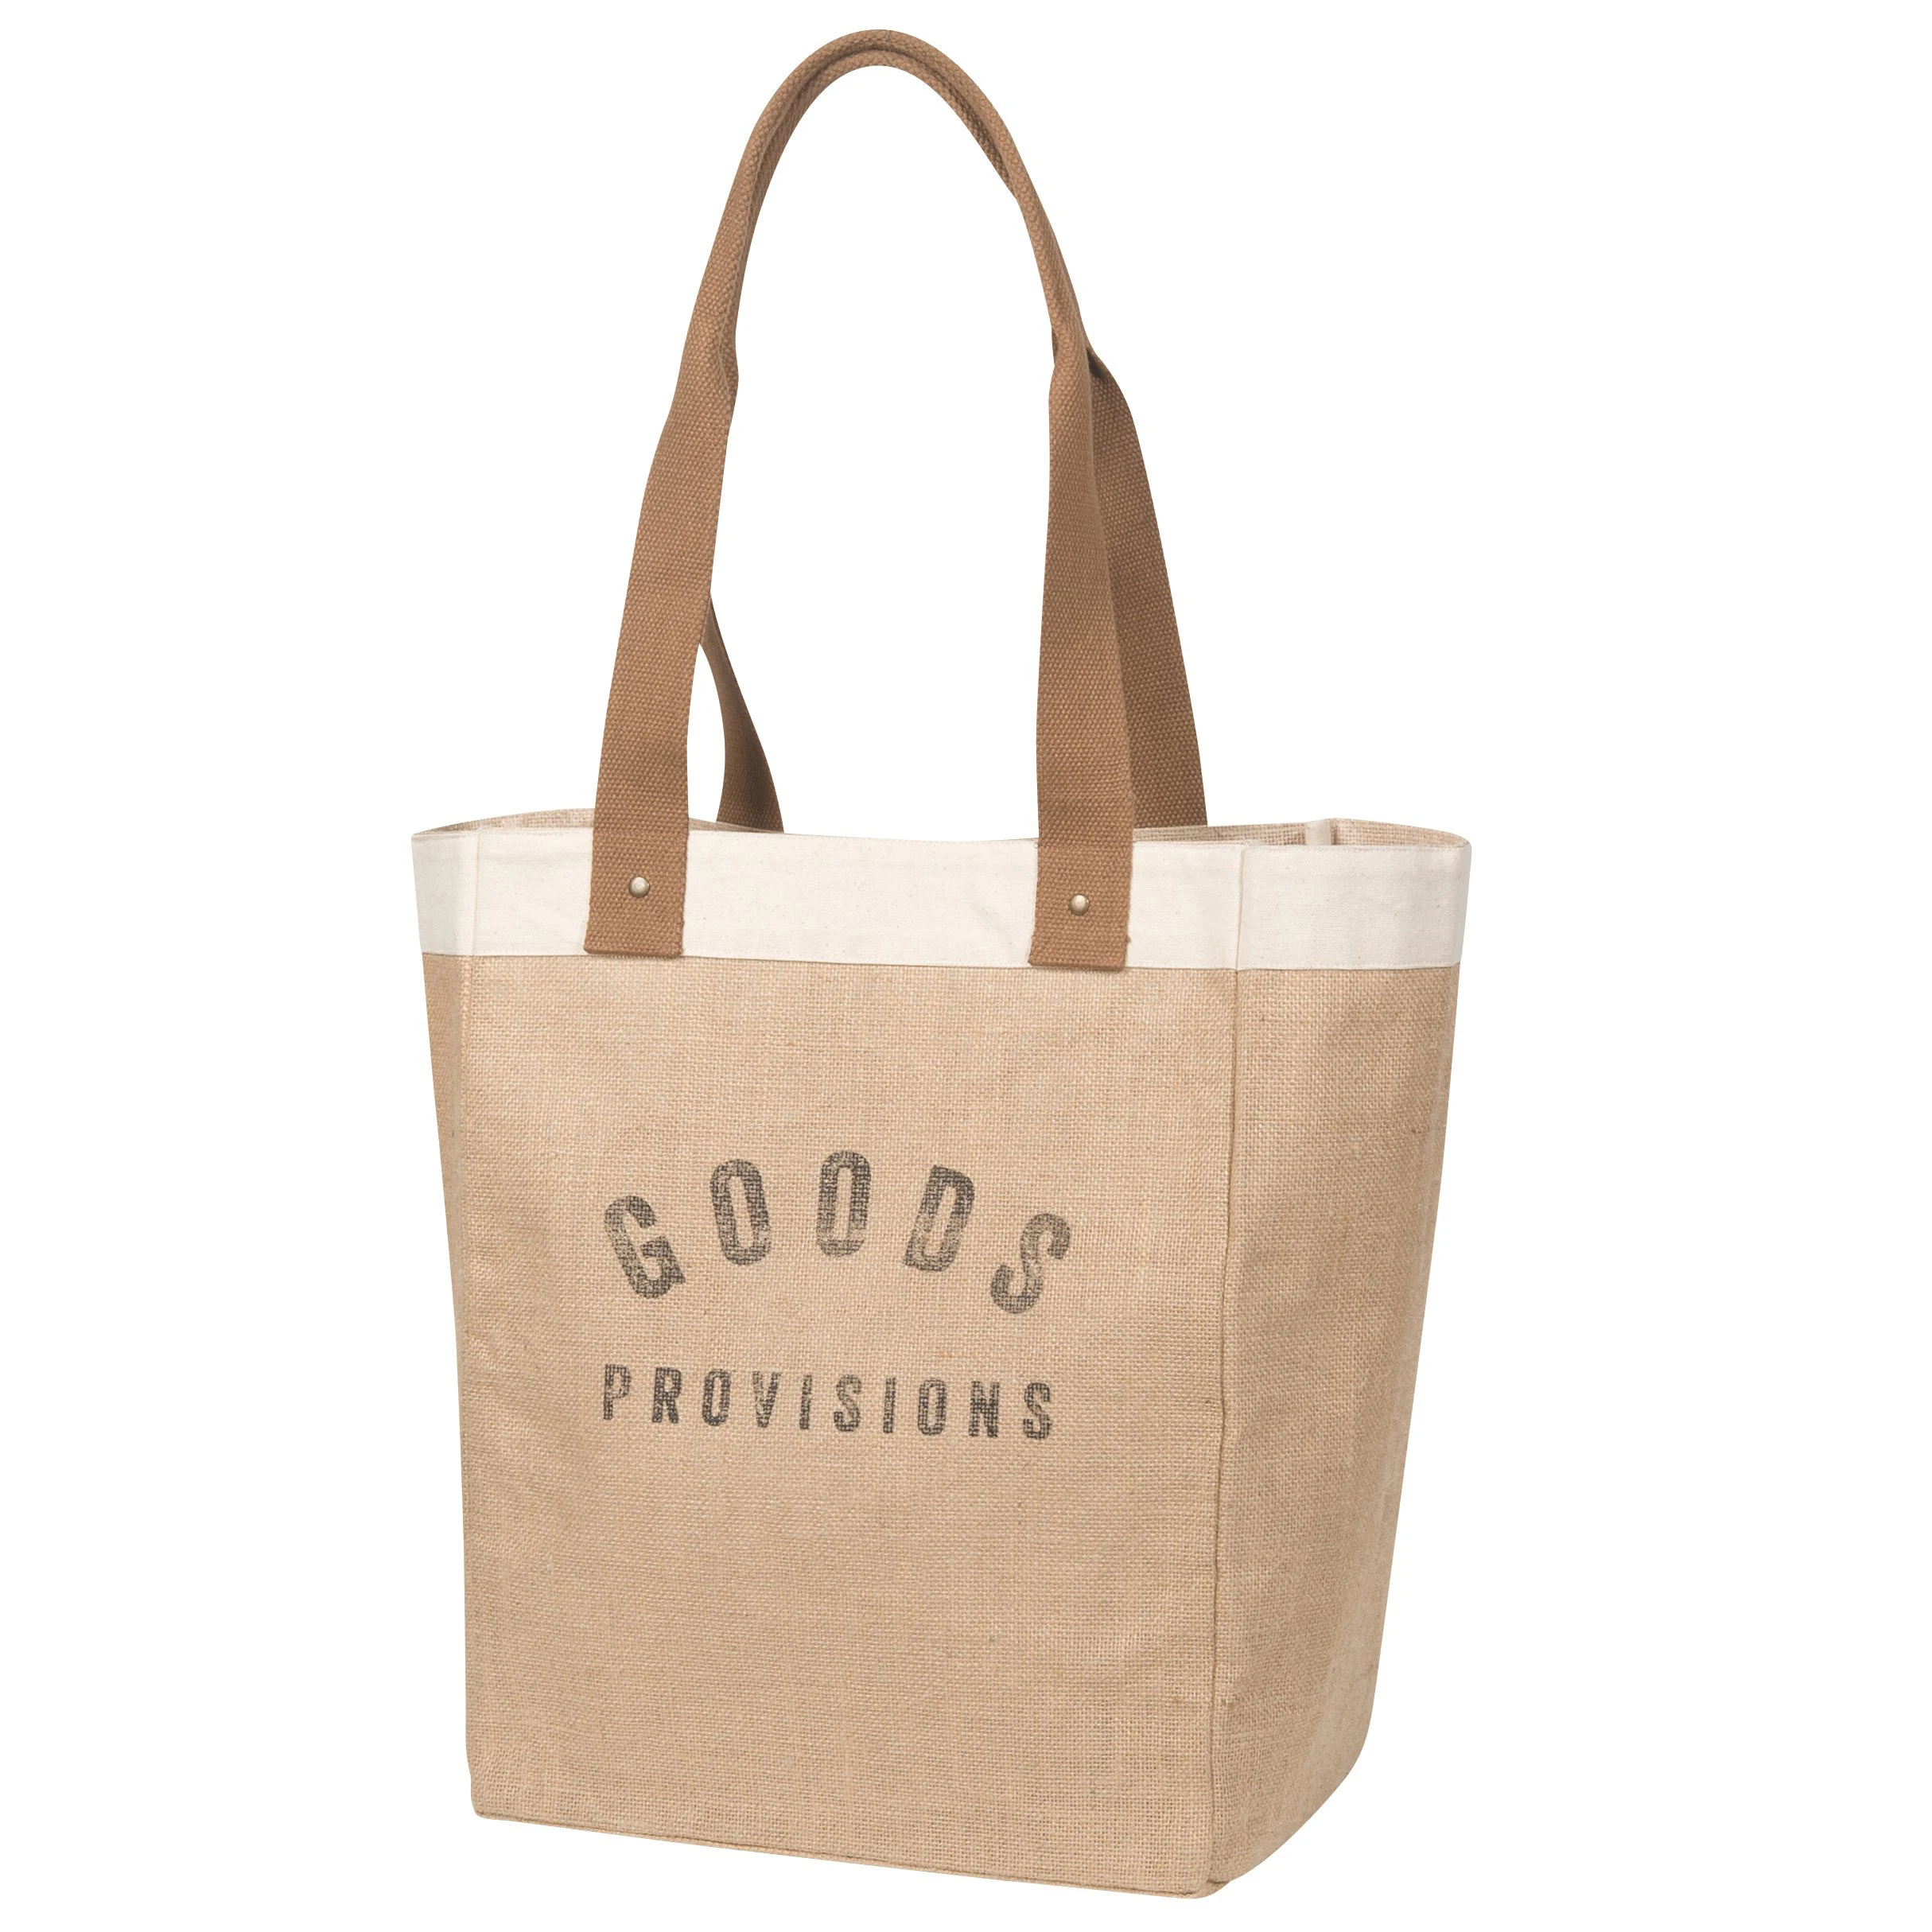 Custom Printed Eco Reusable Large Shopping Tote Burlap Jute Bag With Leather Handles